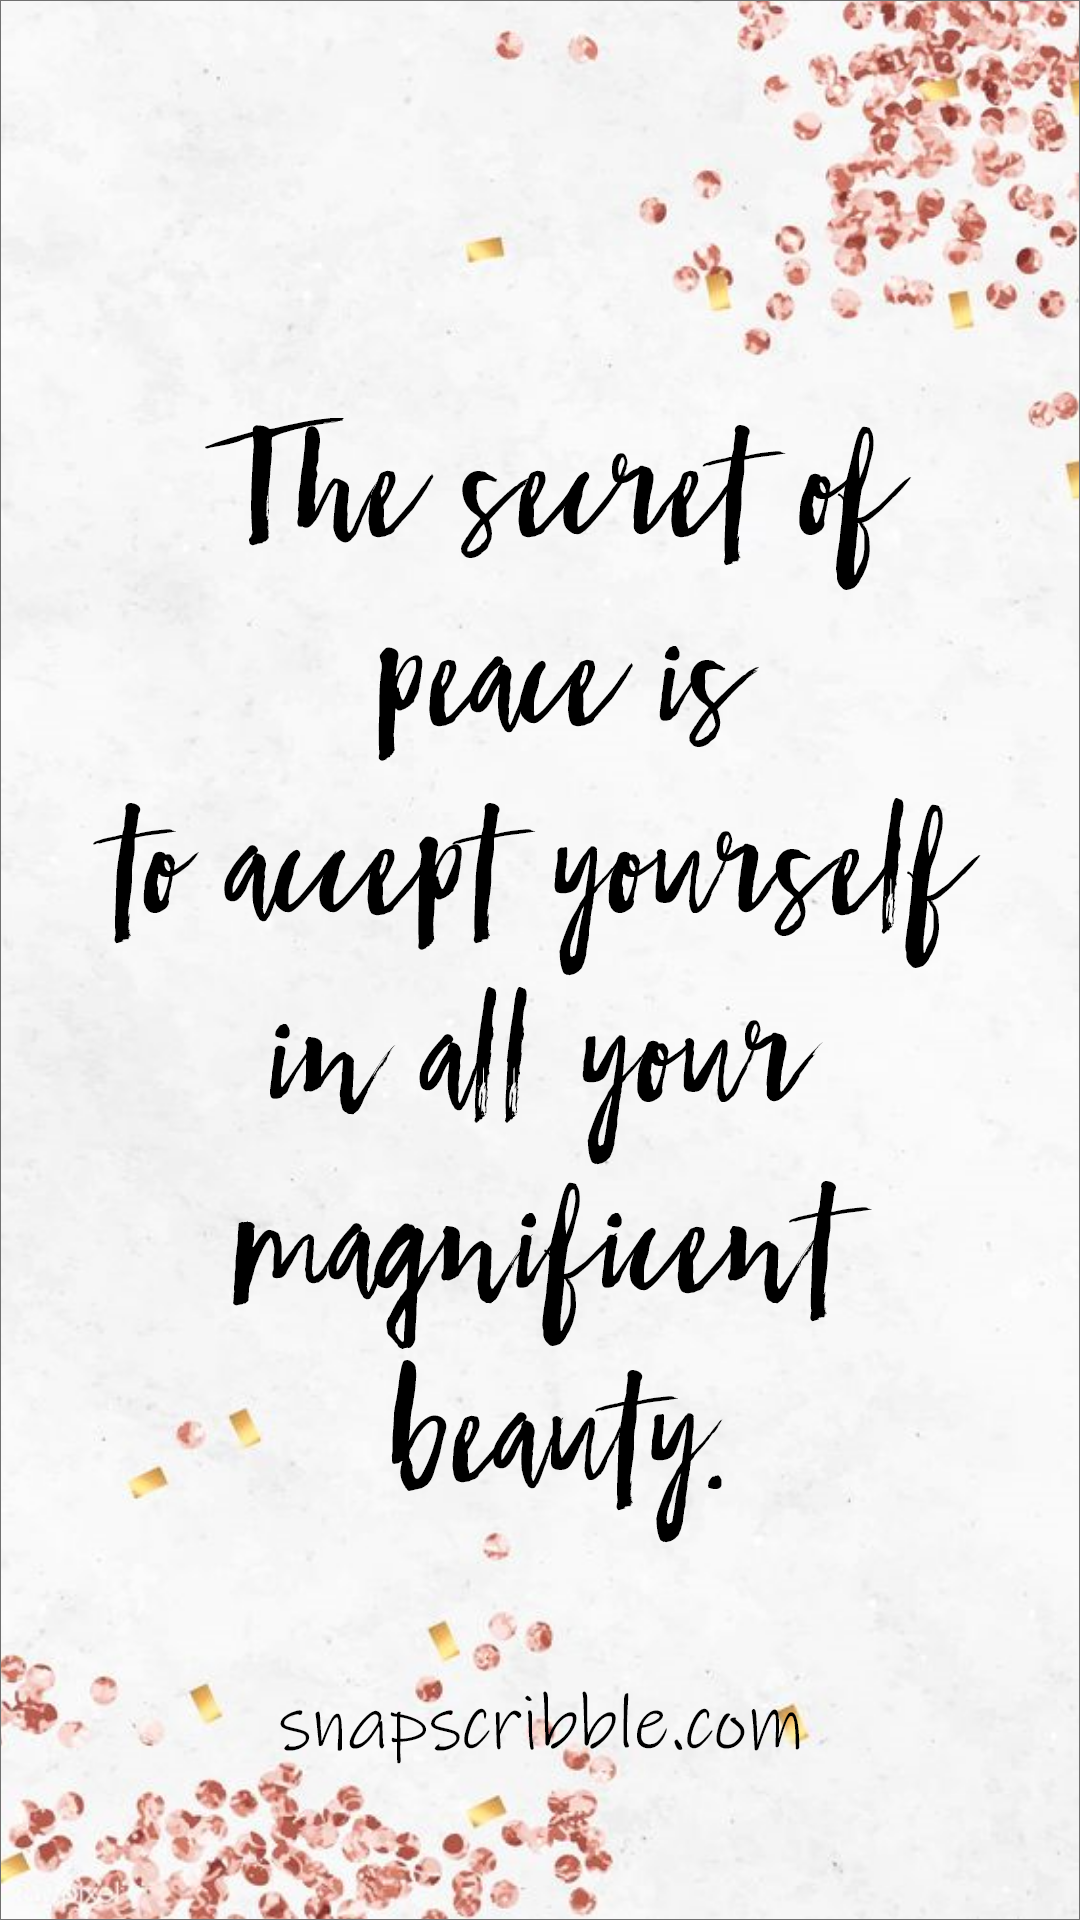 Self Confidence Quotes, Self Awareness Quotes, Sayings and Phone Wallpaper. Self awareness quotes, Self quotes, Self confidence quotes